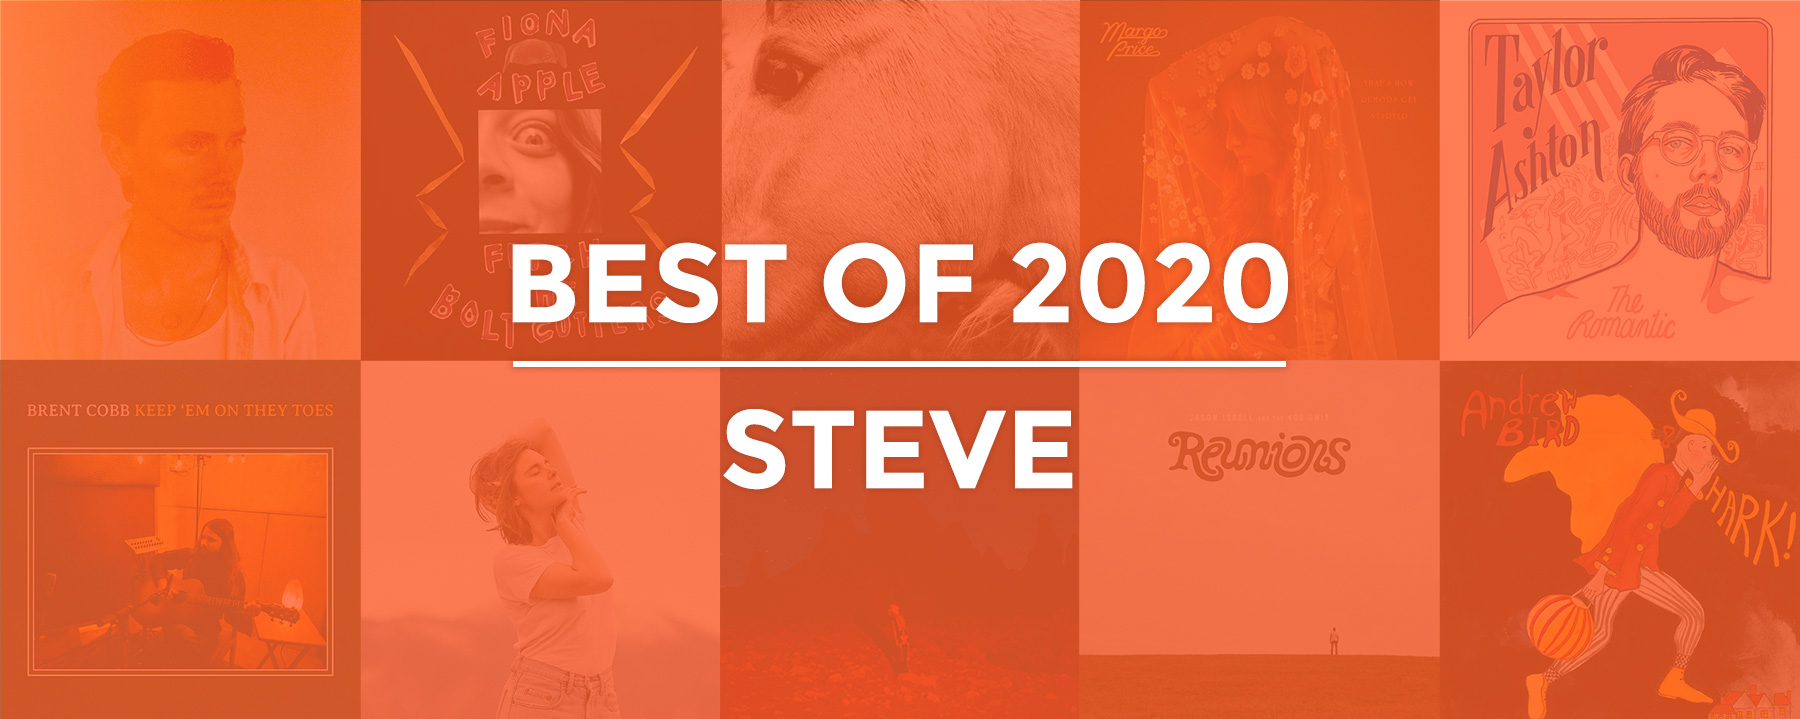 2020 | Steve's Best of the Year